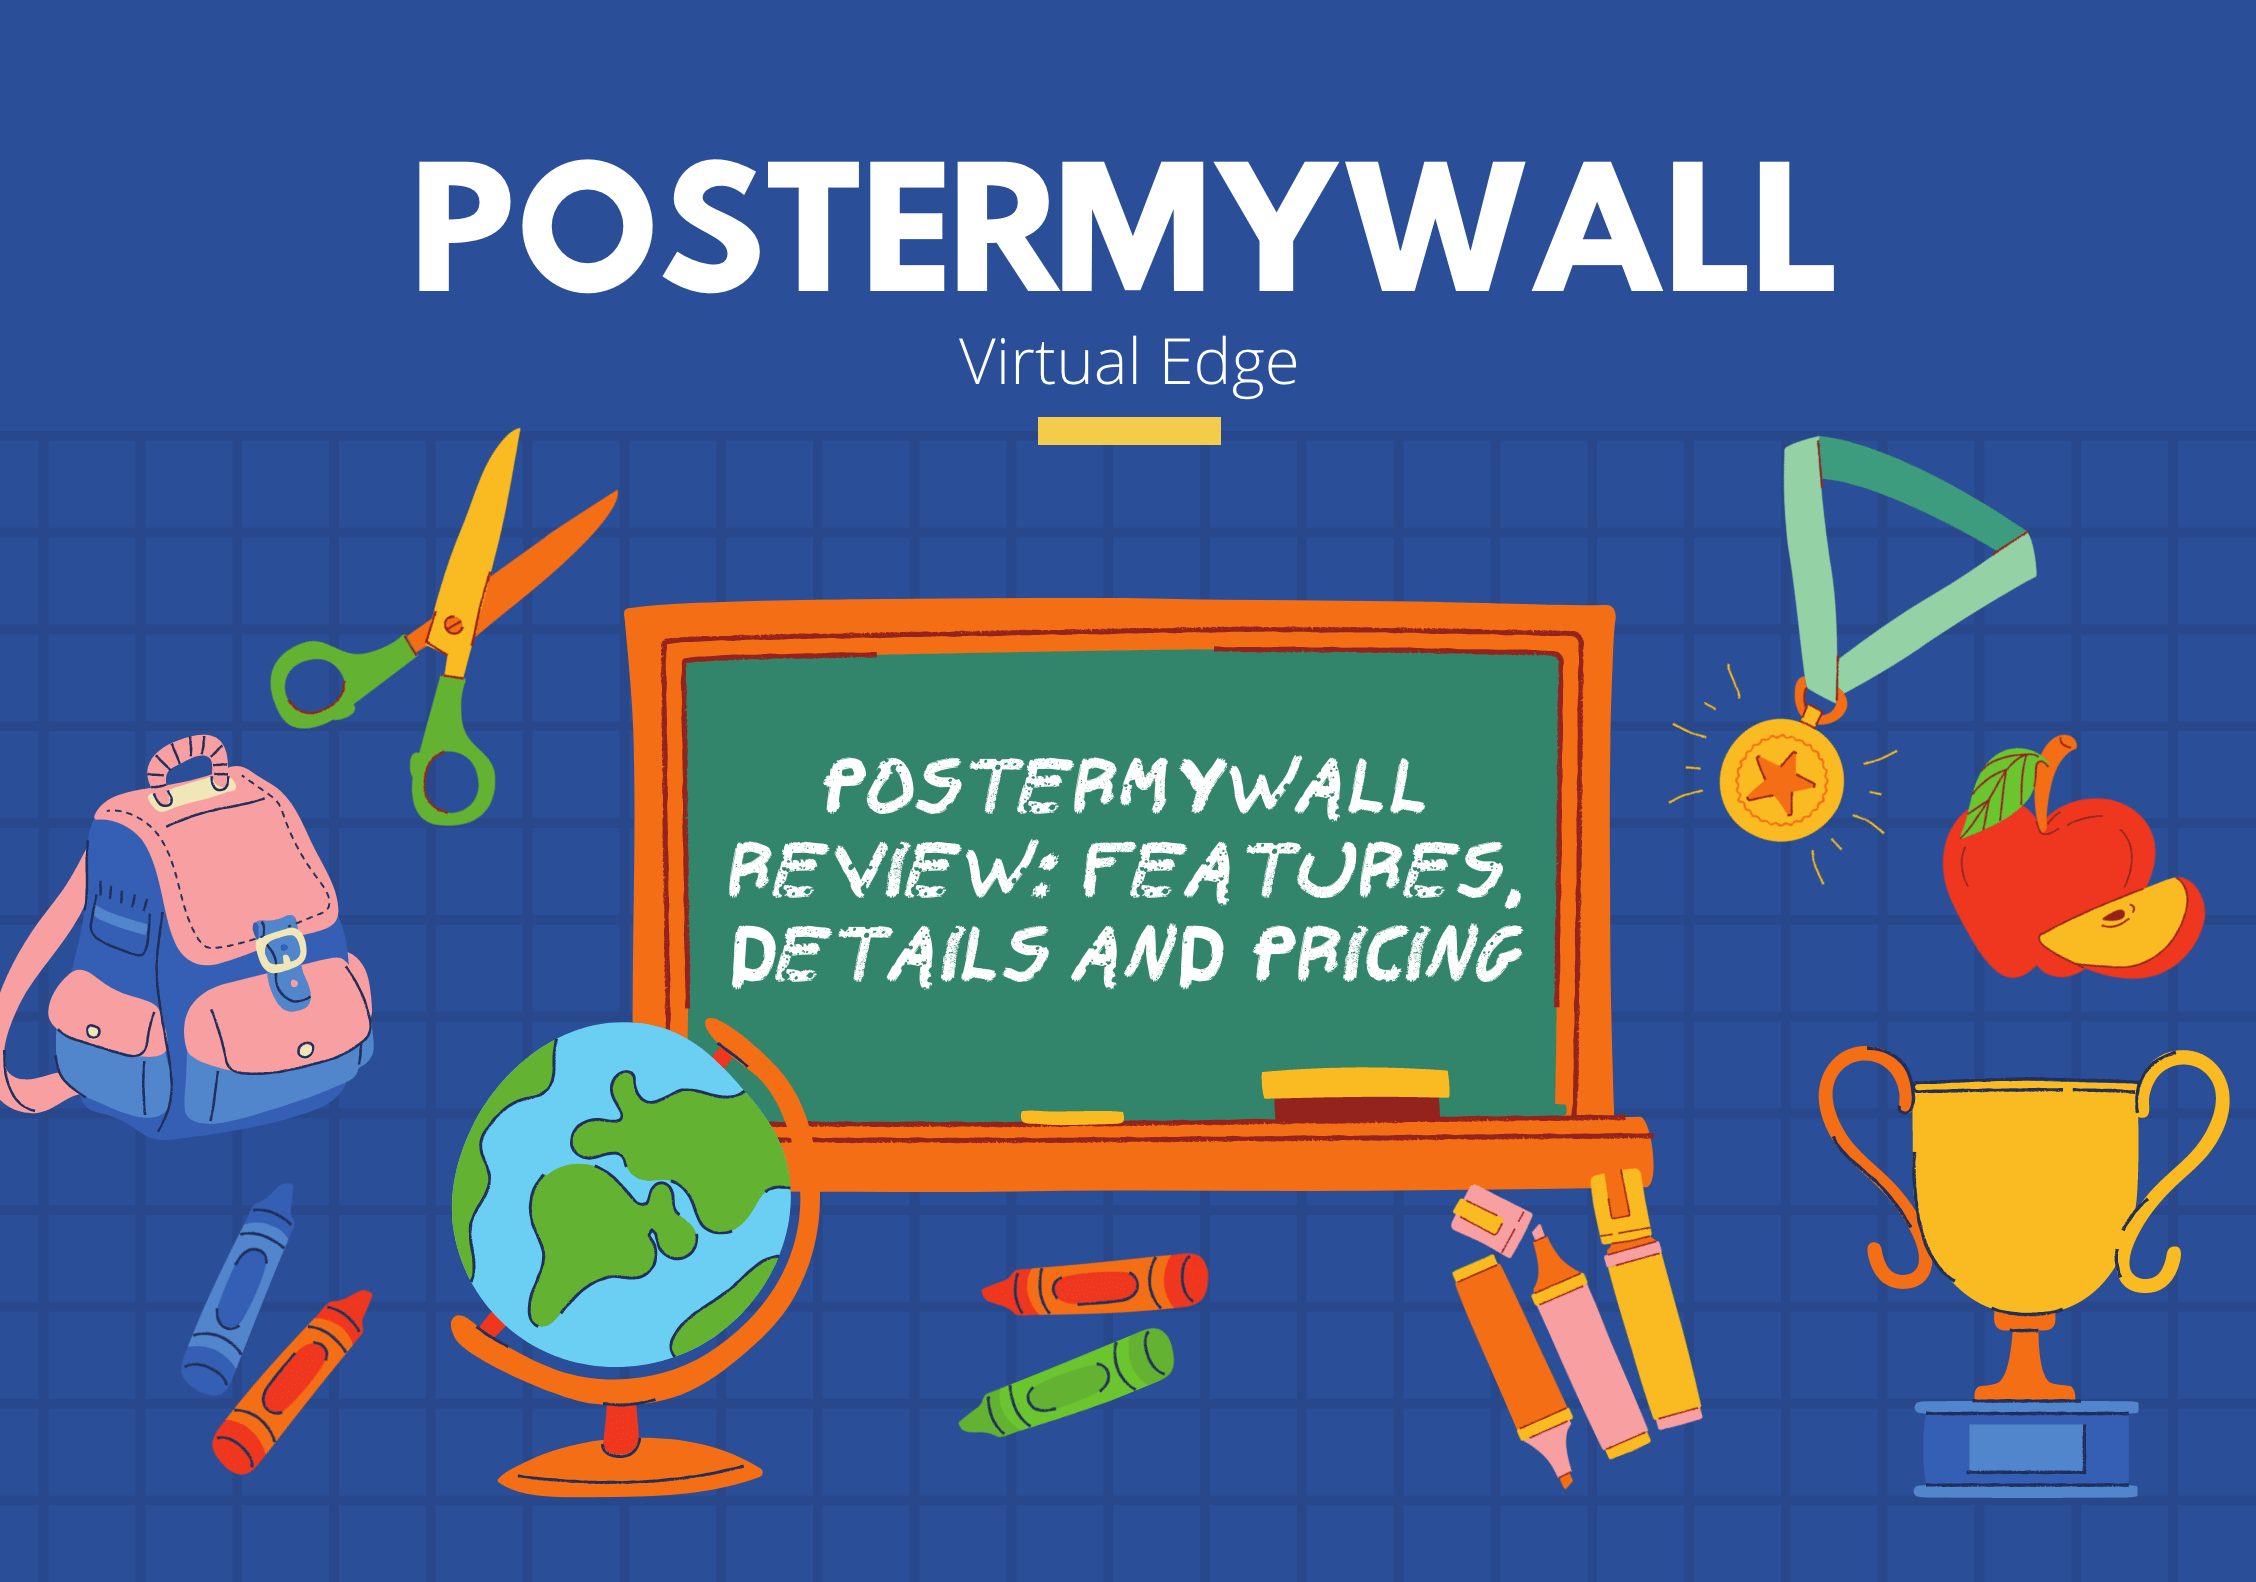 PosterMyWall Review: Features, Details and Pricing